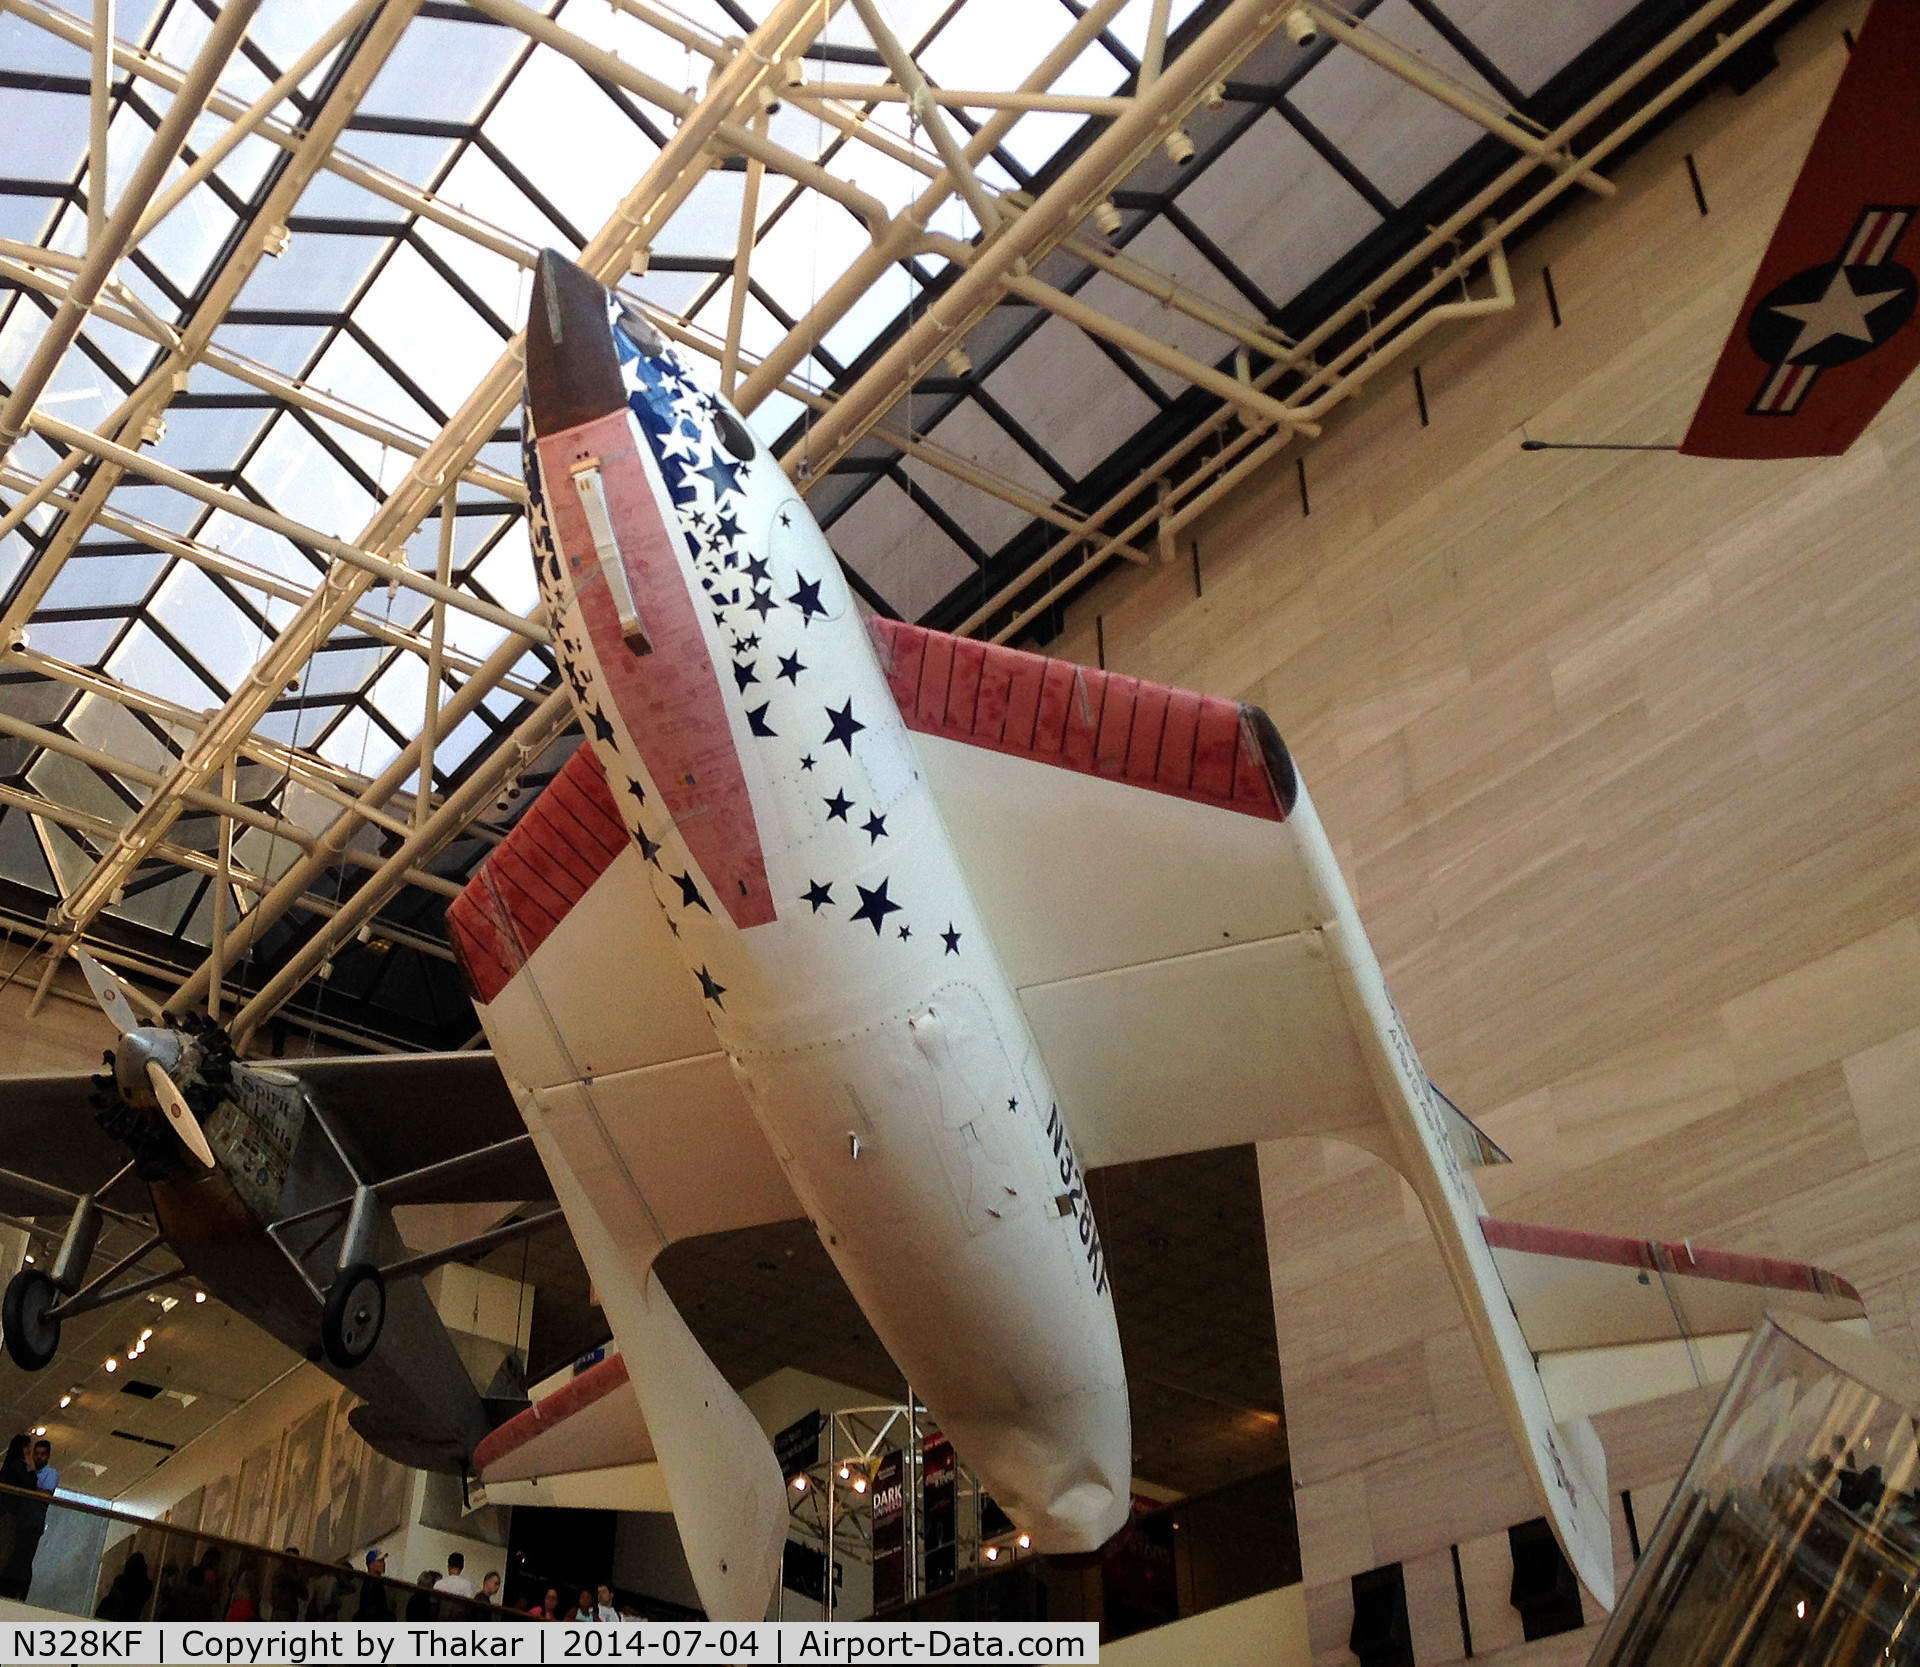 N328KF, 2003 Scaled Composites 316 C/N 001, On display @ the National Air and Space Museum